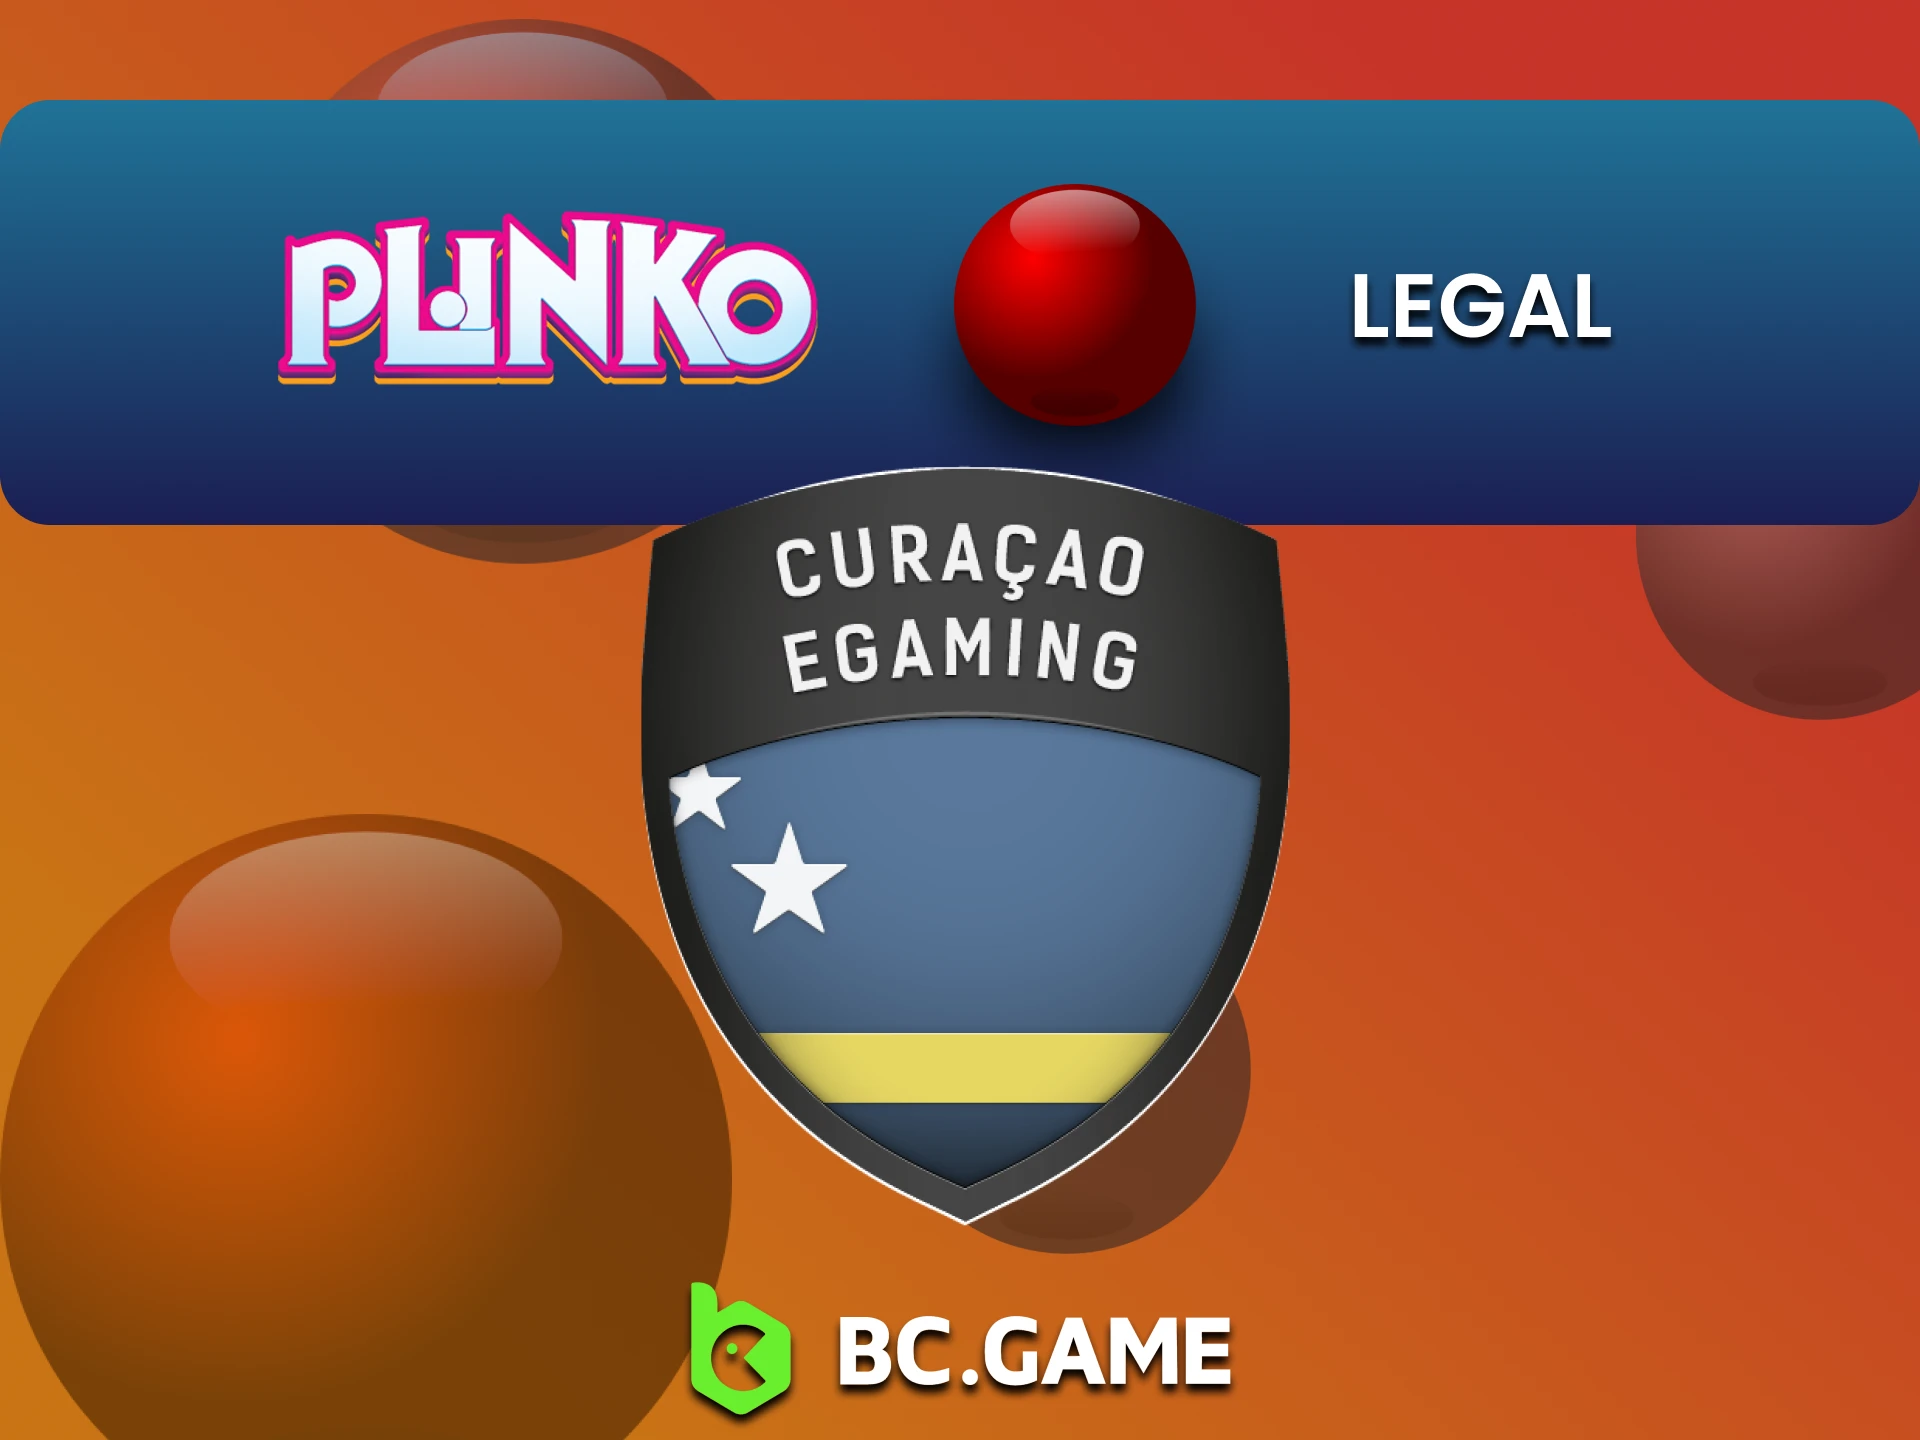 BCGame has a special license for playing Plinko.